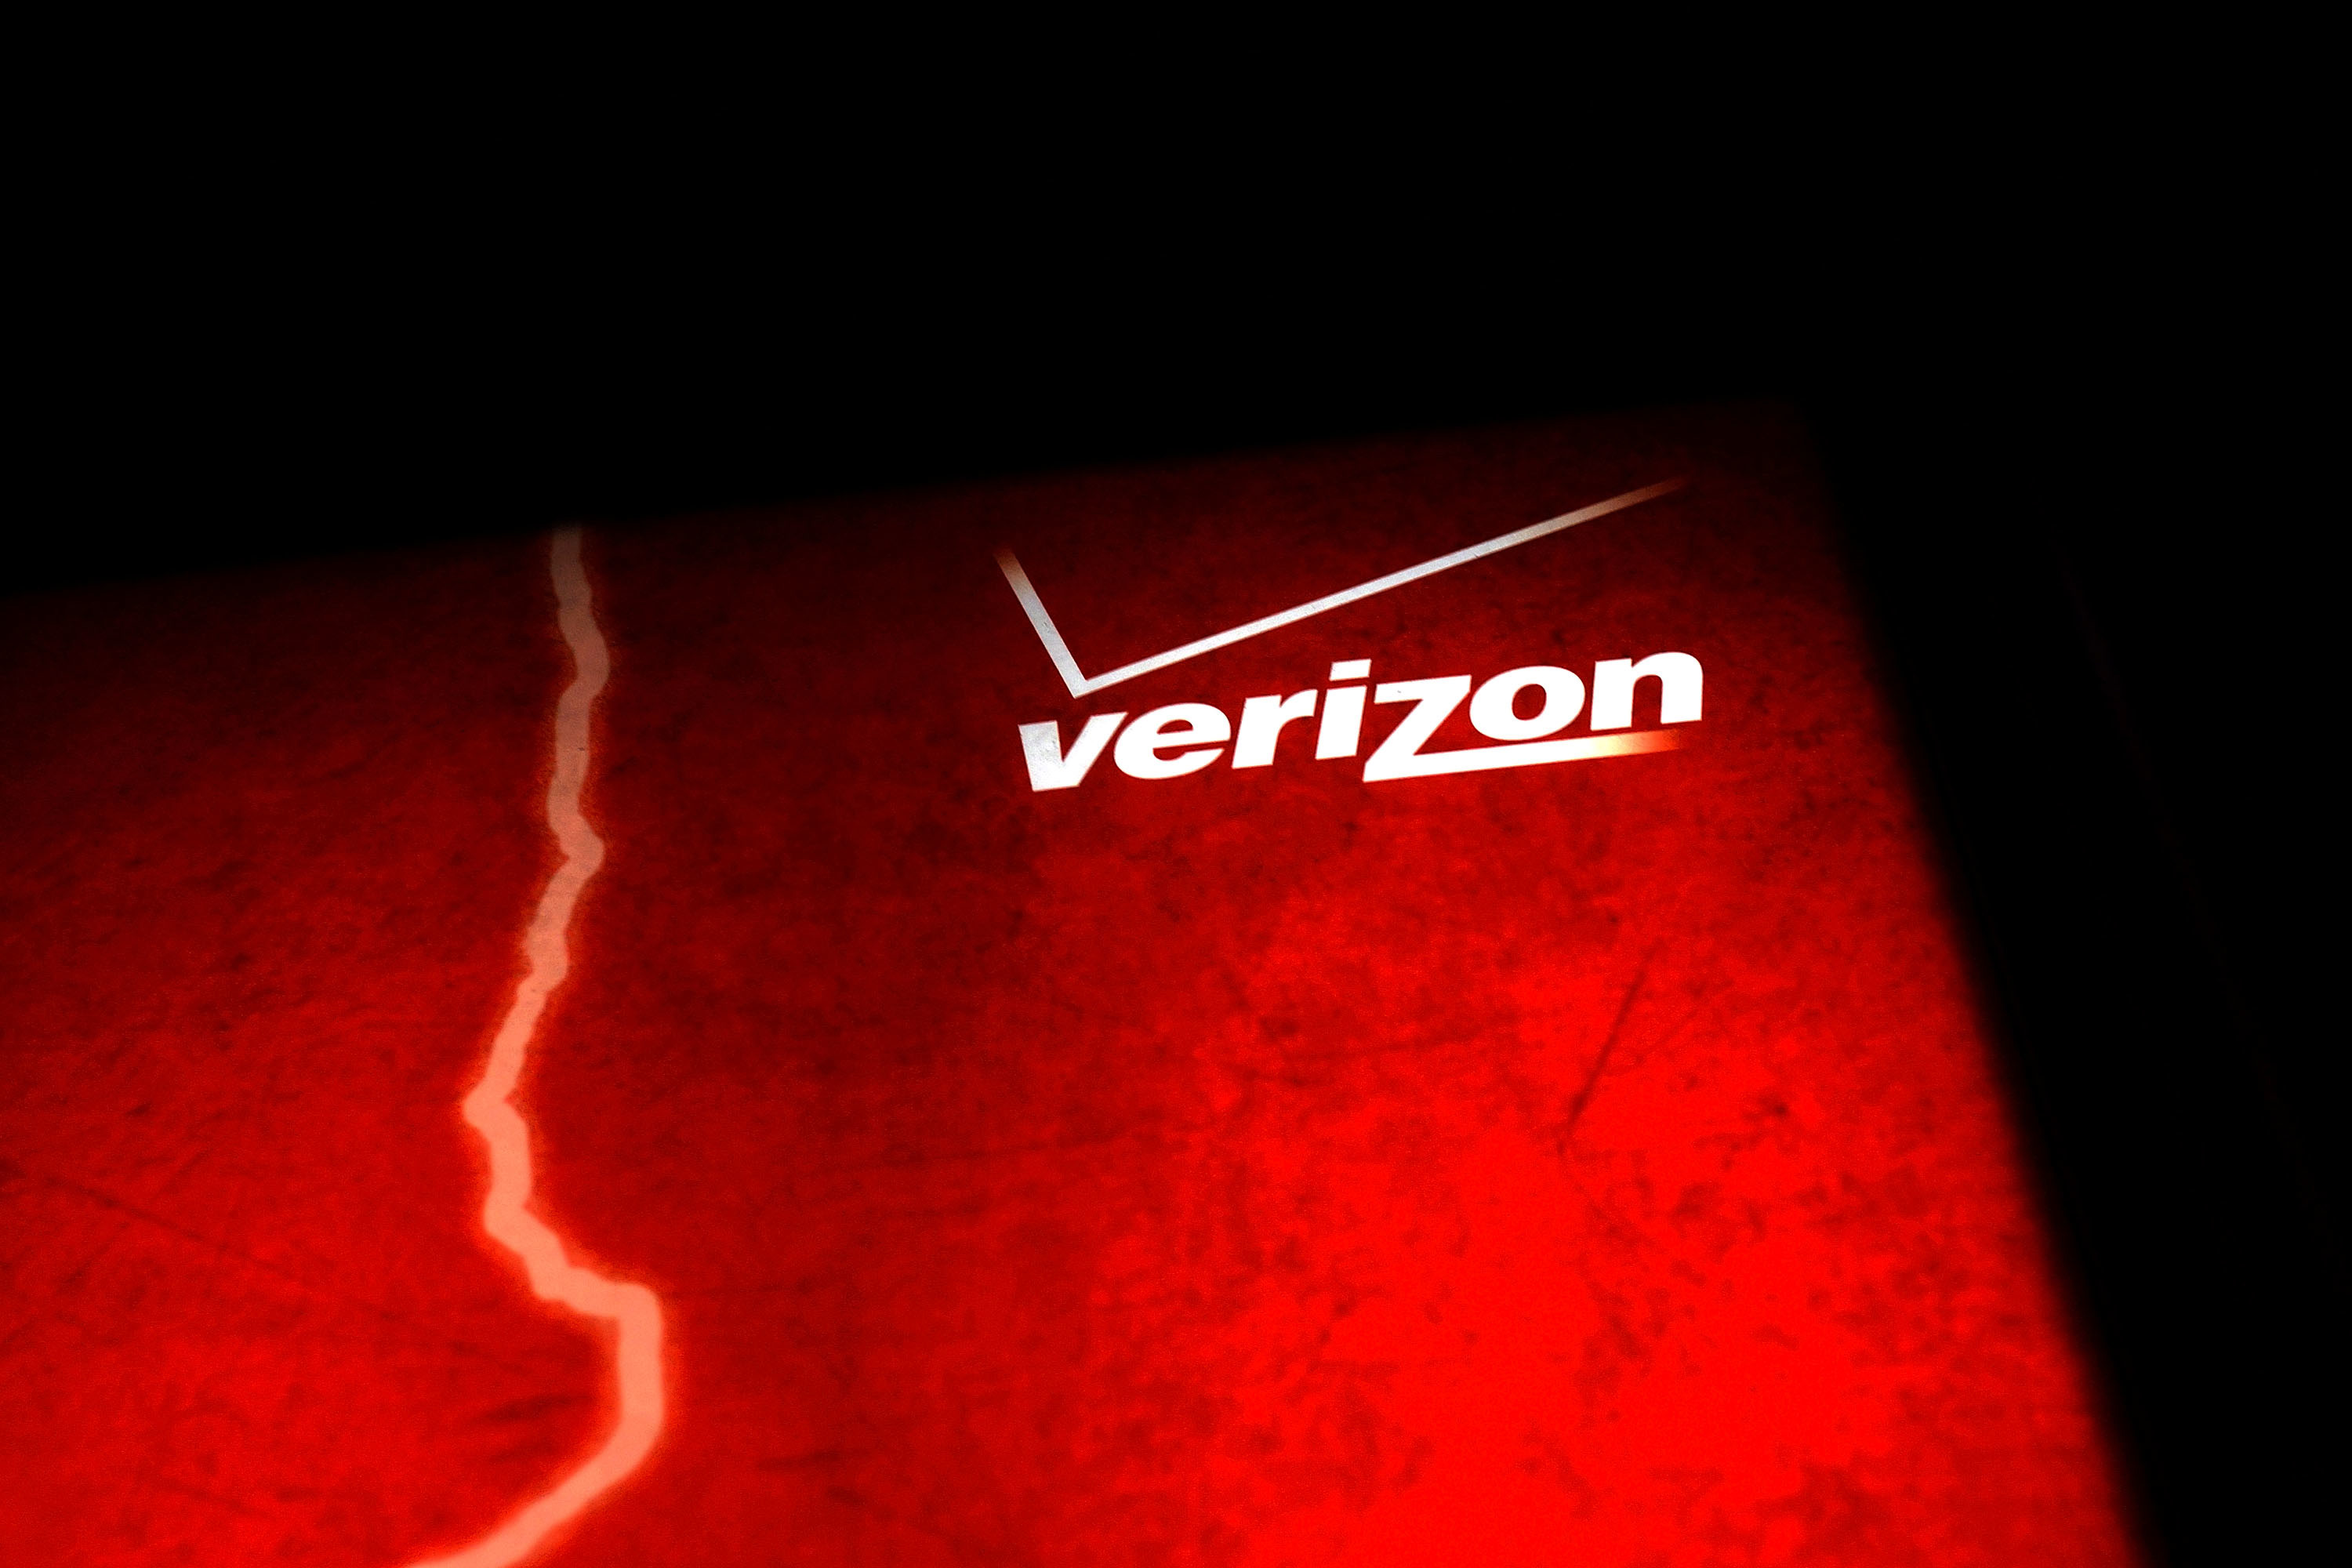 3000x2000 Verizon throttling firefighters may have violated FCC rule, Democrats say